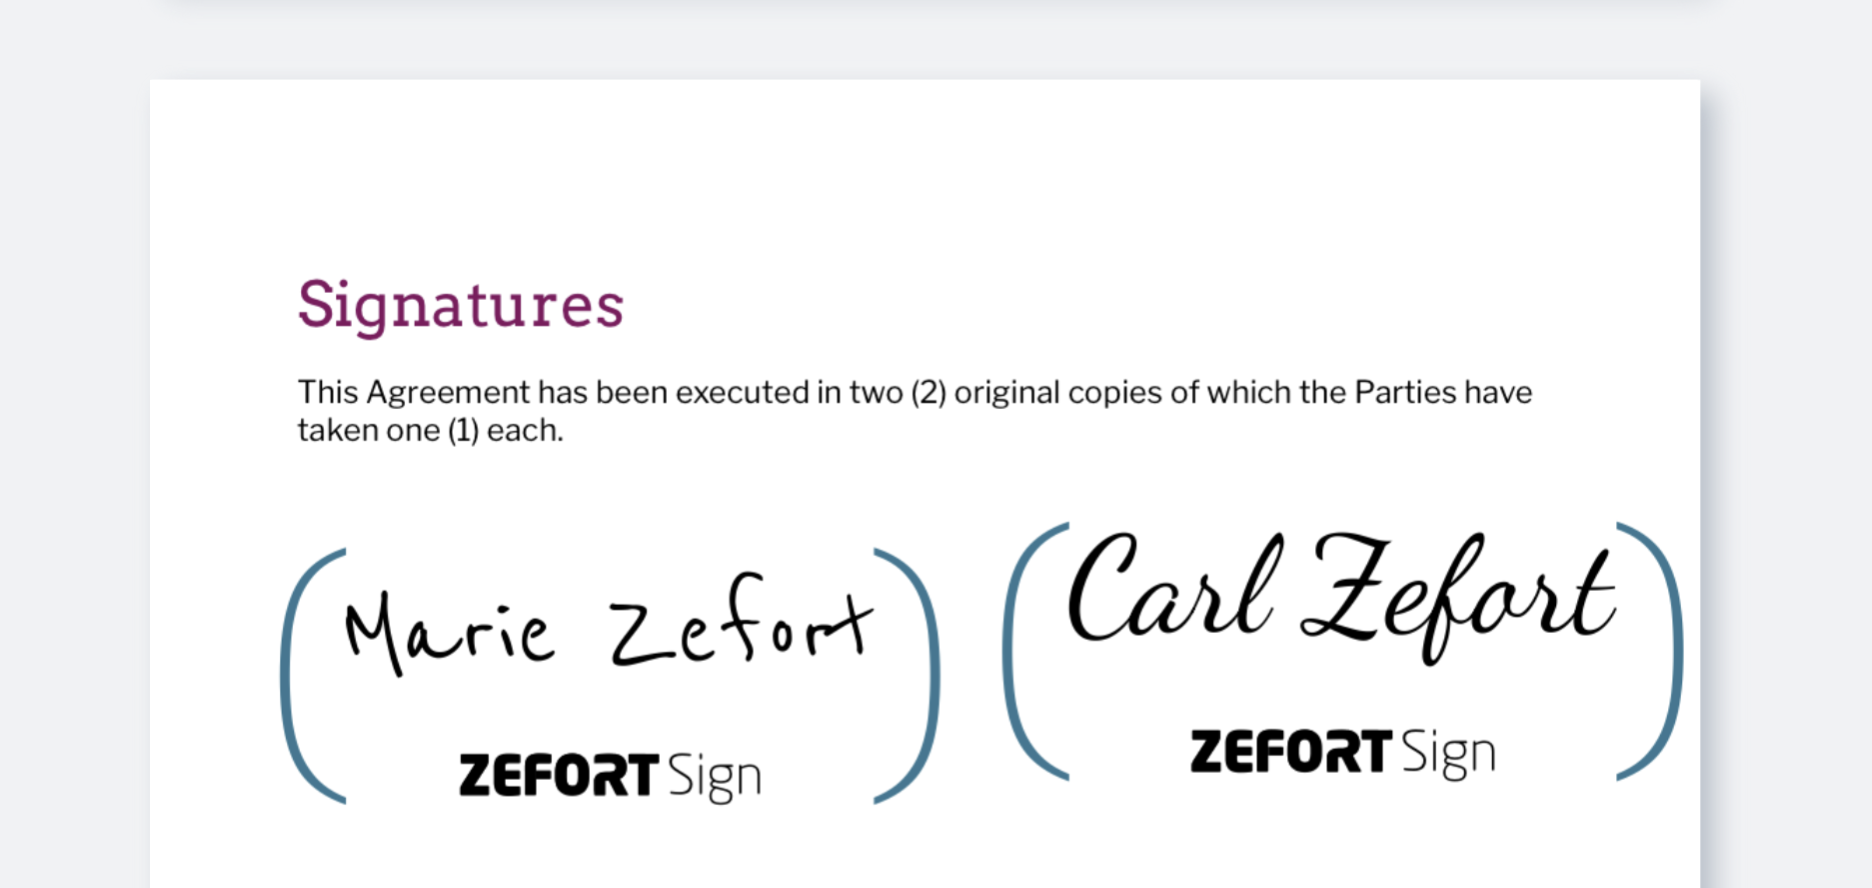 zefort sign - document with signature stamps